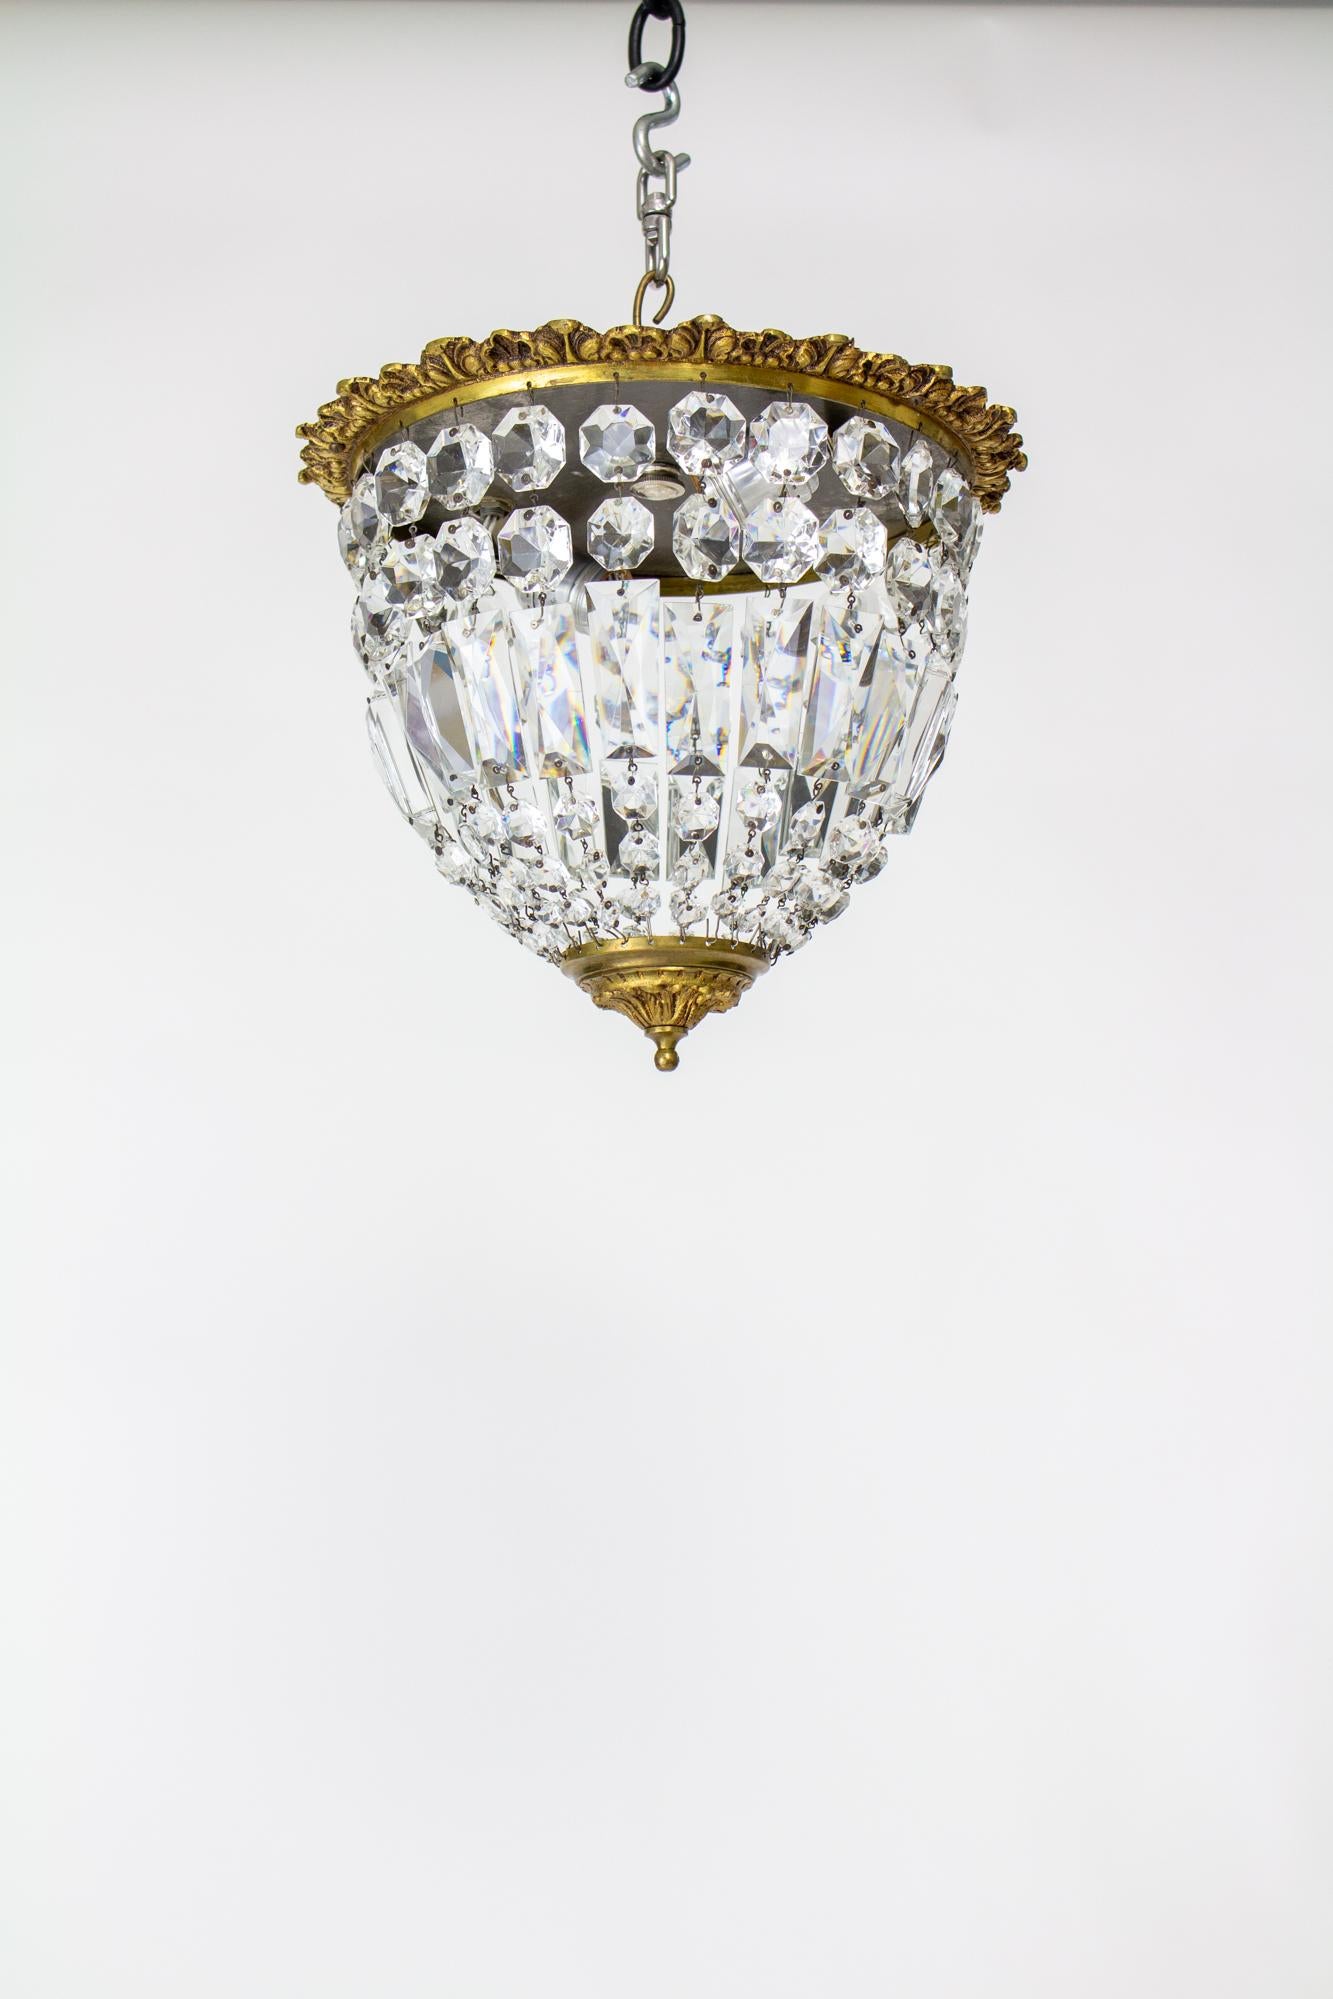 Hollywood Regency Mid 20th Century Brass and Crystal Basket Flush Mount Fixture For Sale